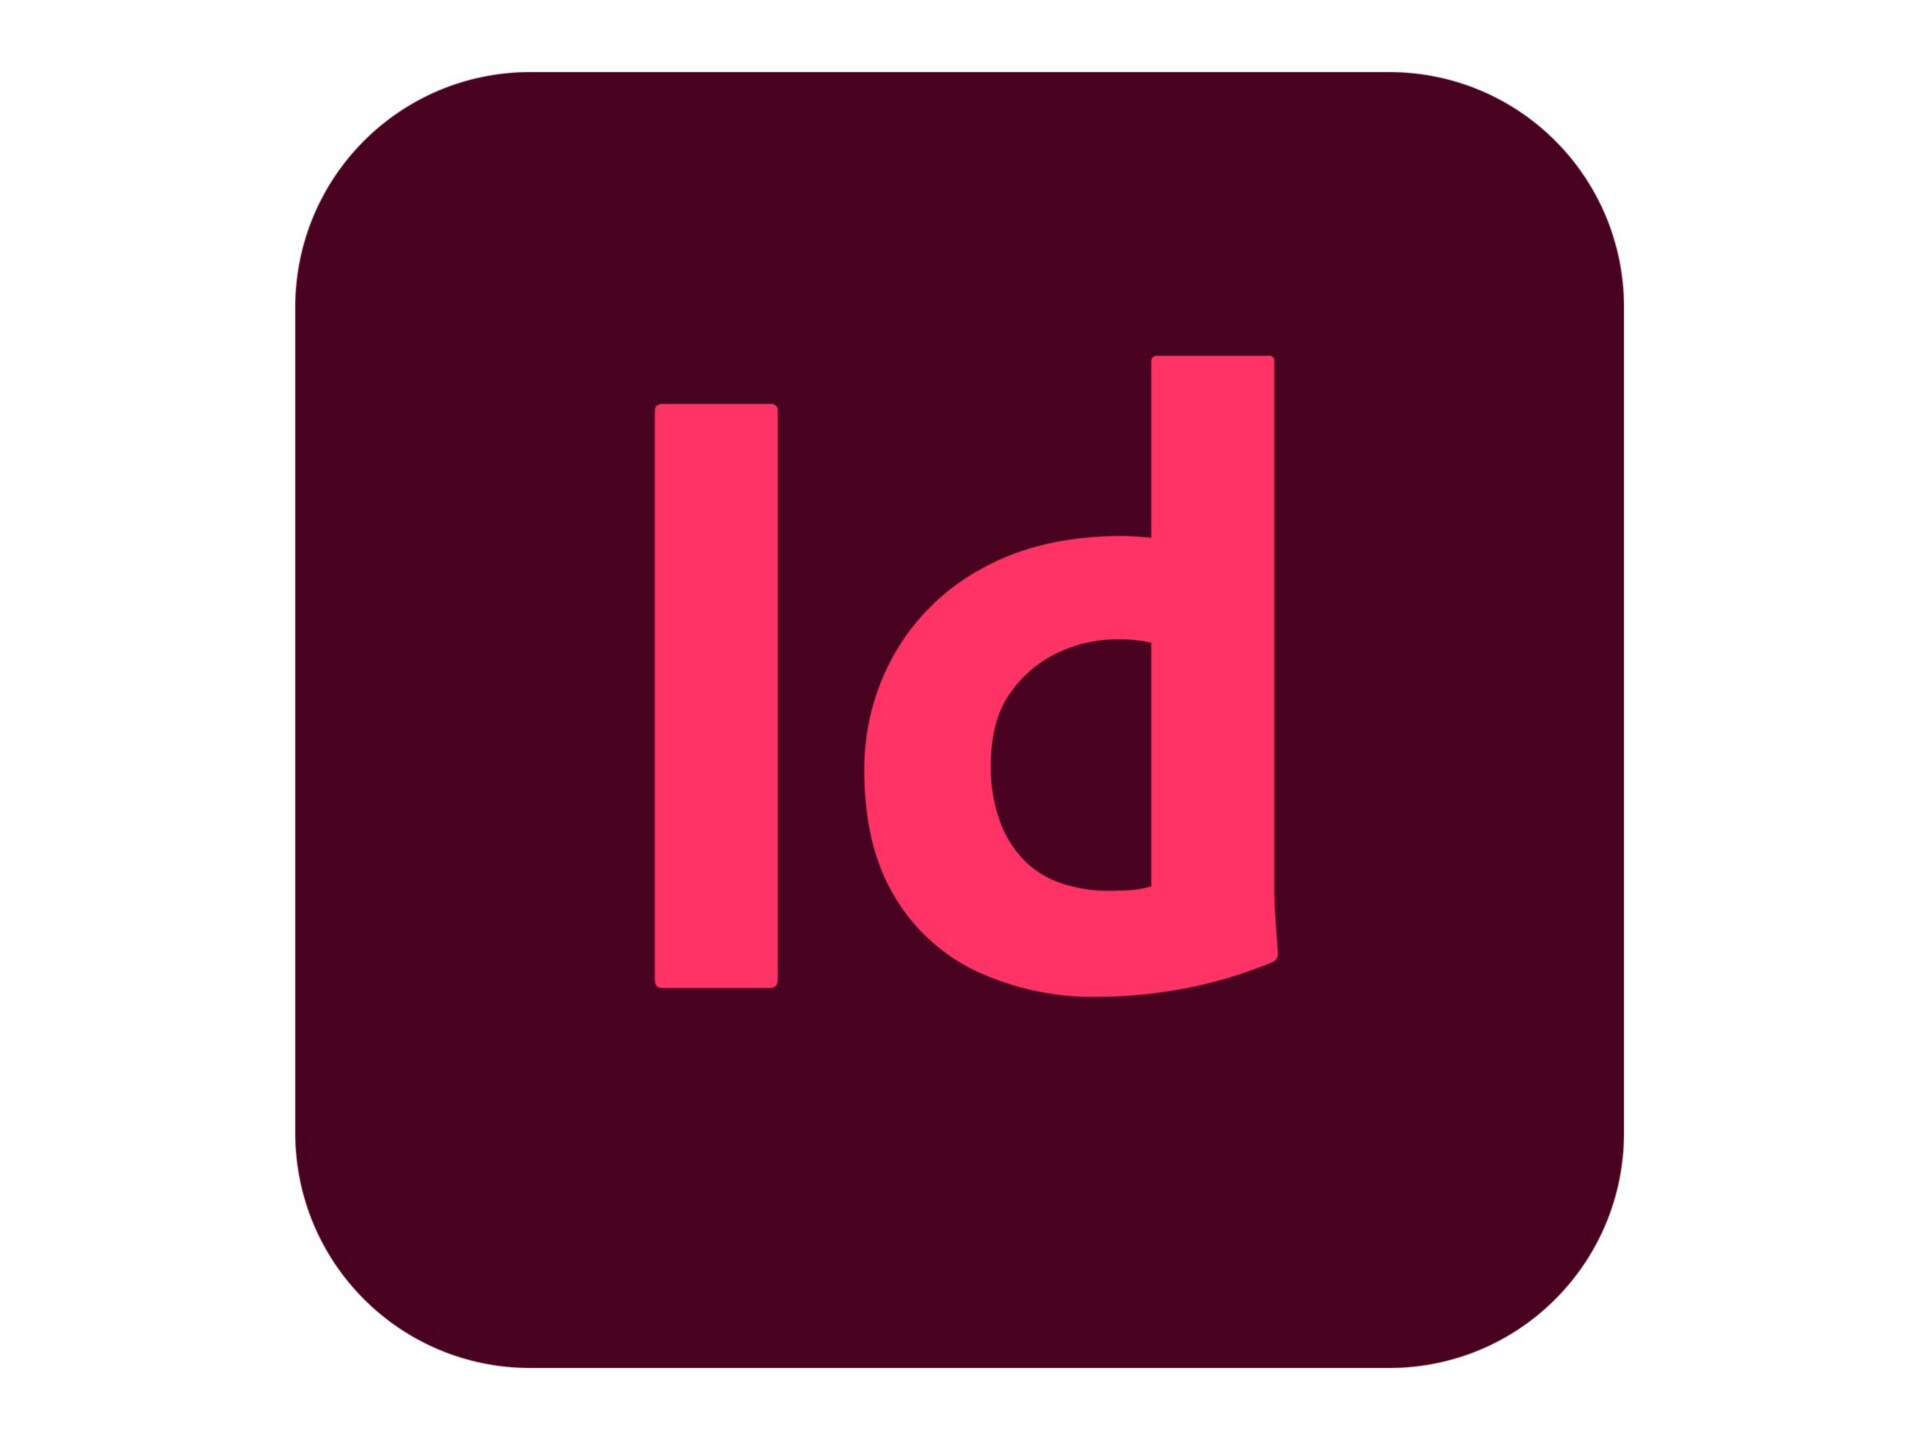 Adobe InDesign CC for teams - Subscription New (18 months) - 1 named user